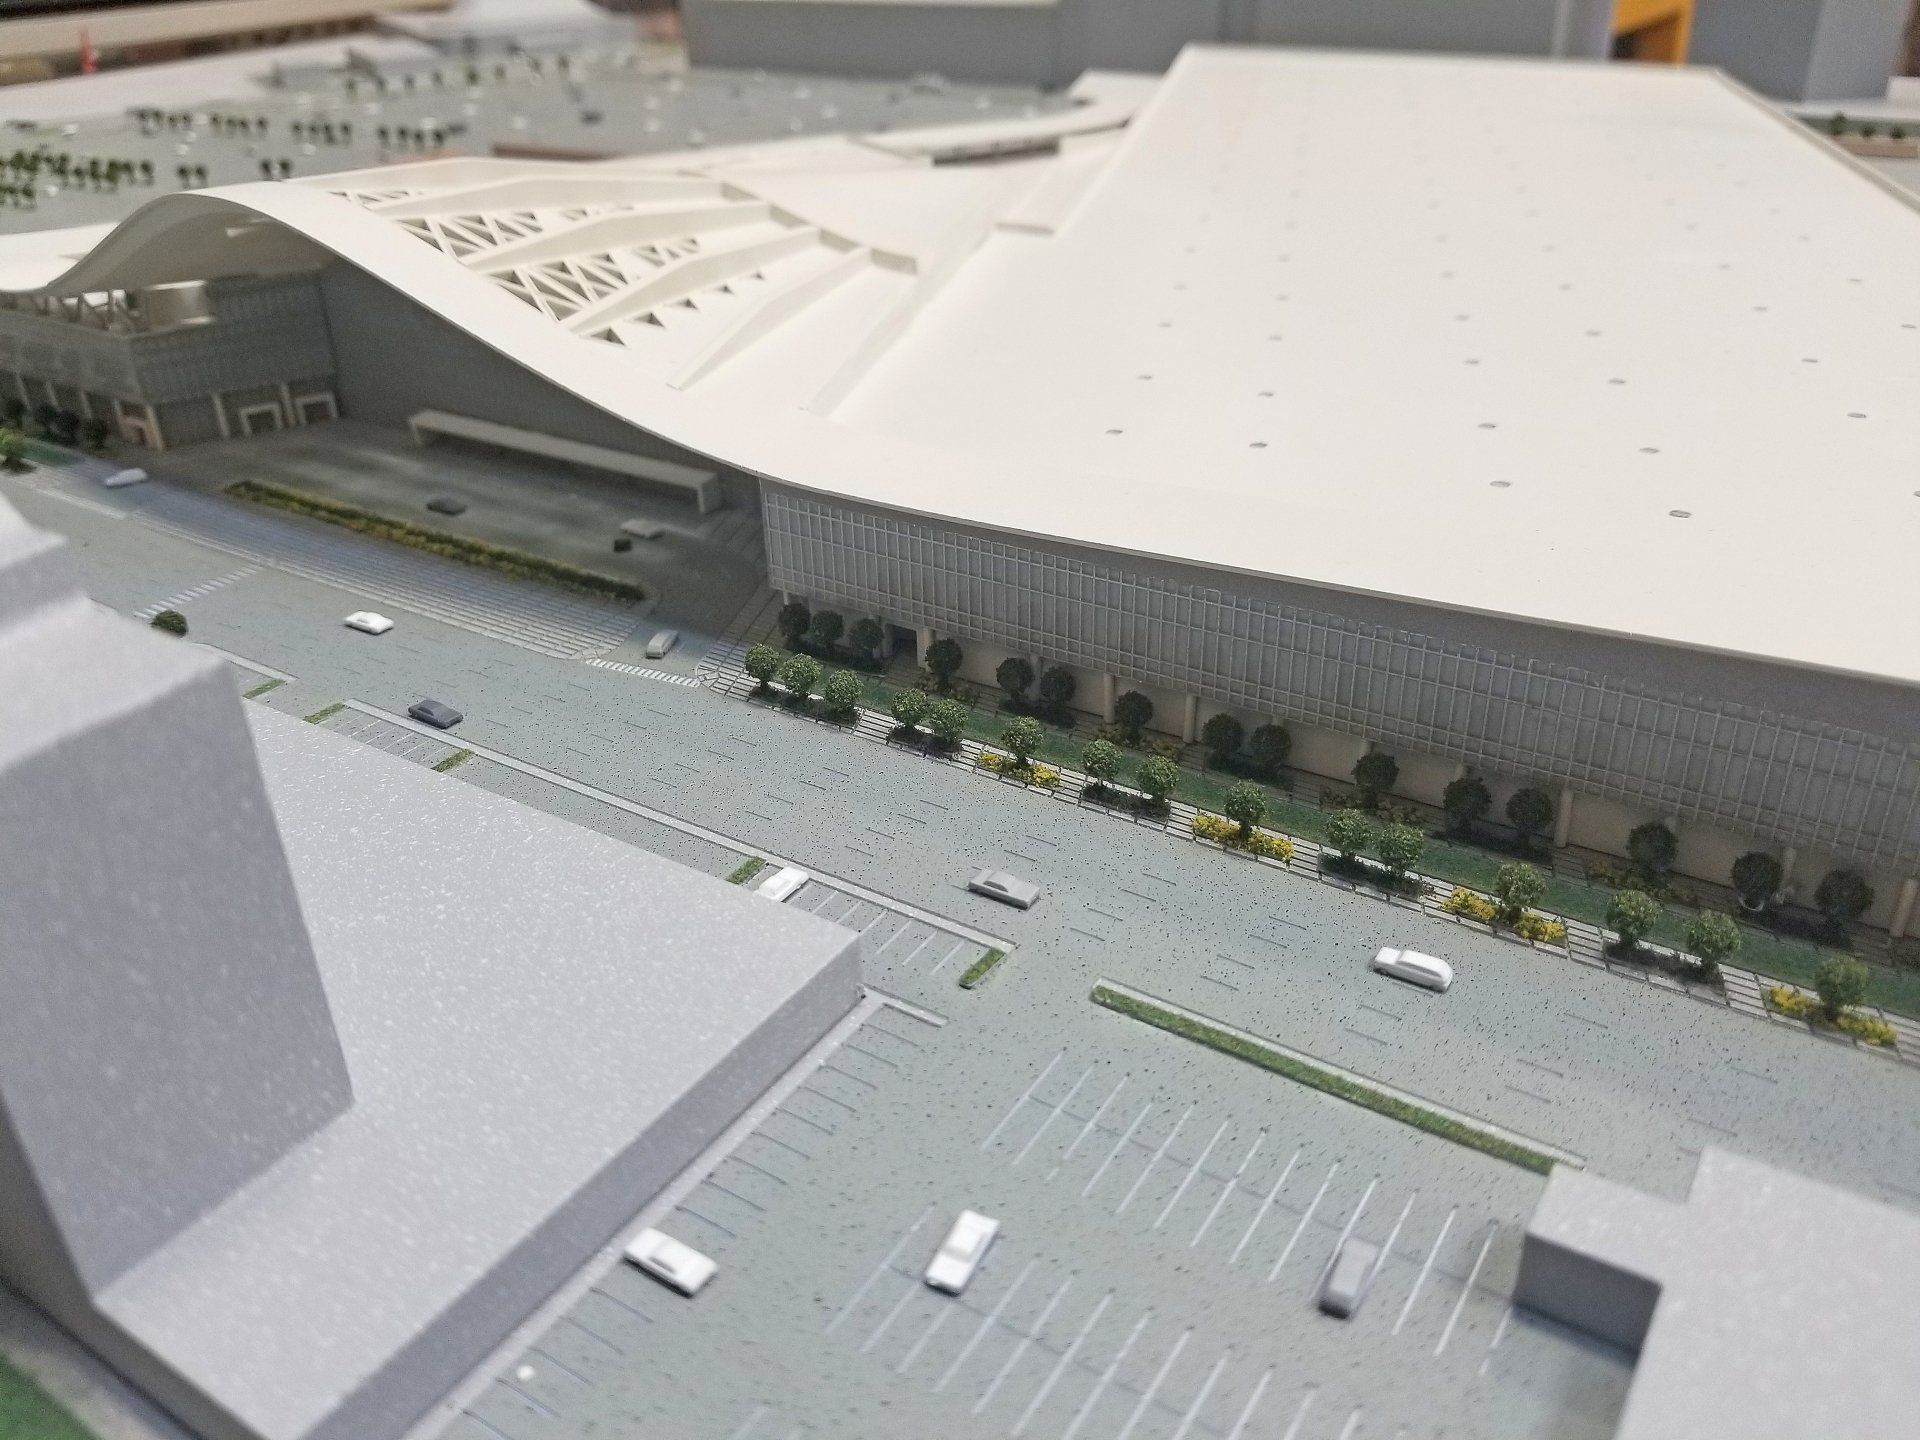 3d printed model of Vegas Convention Center